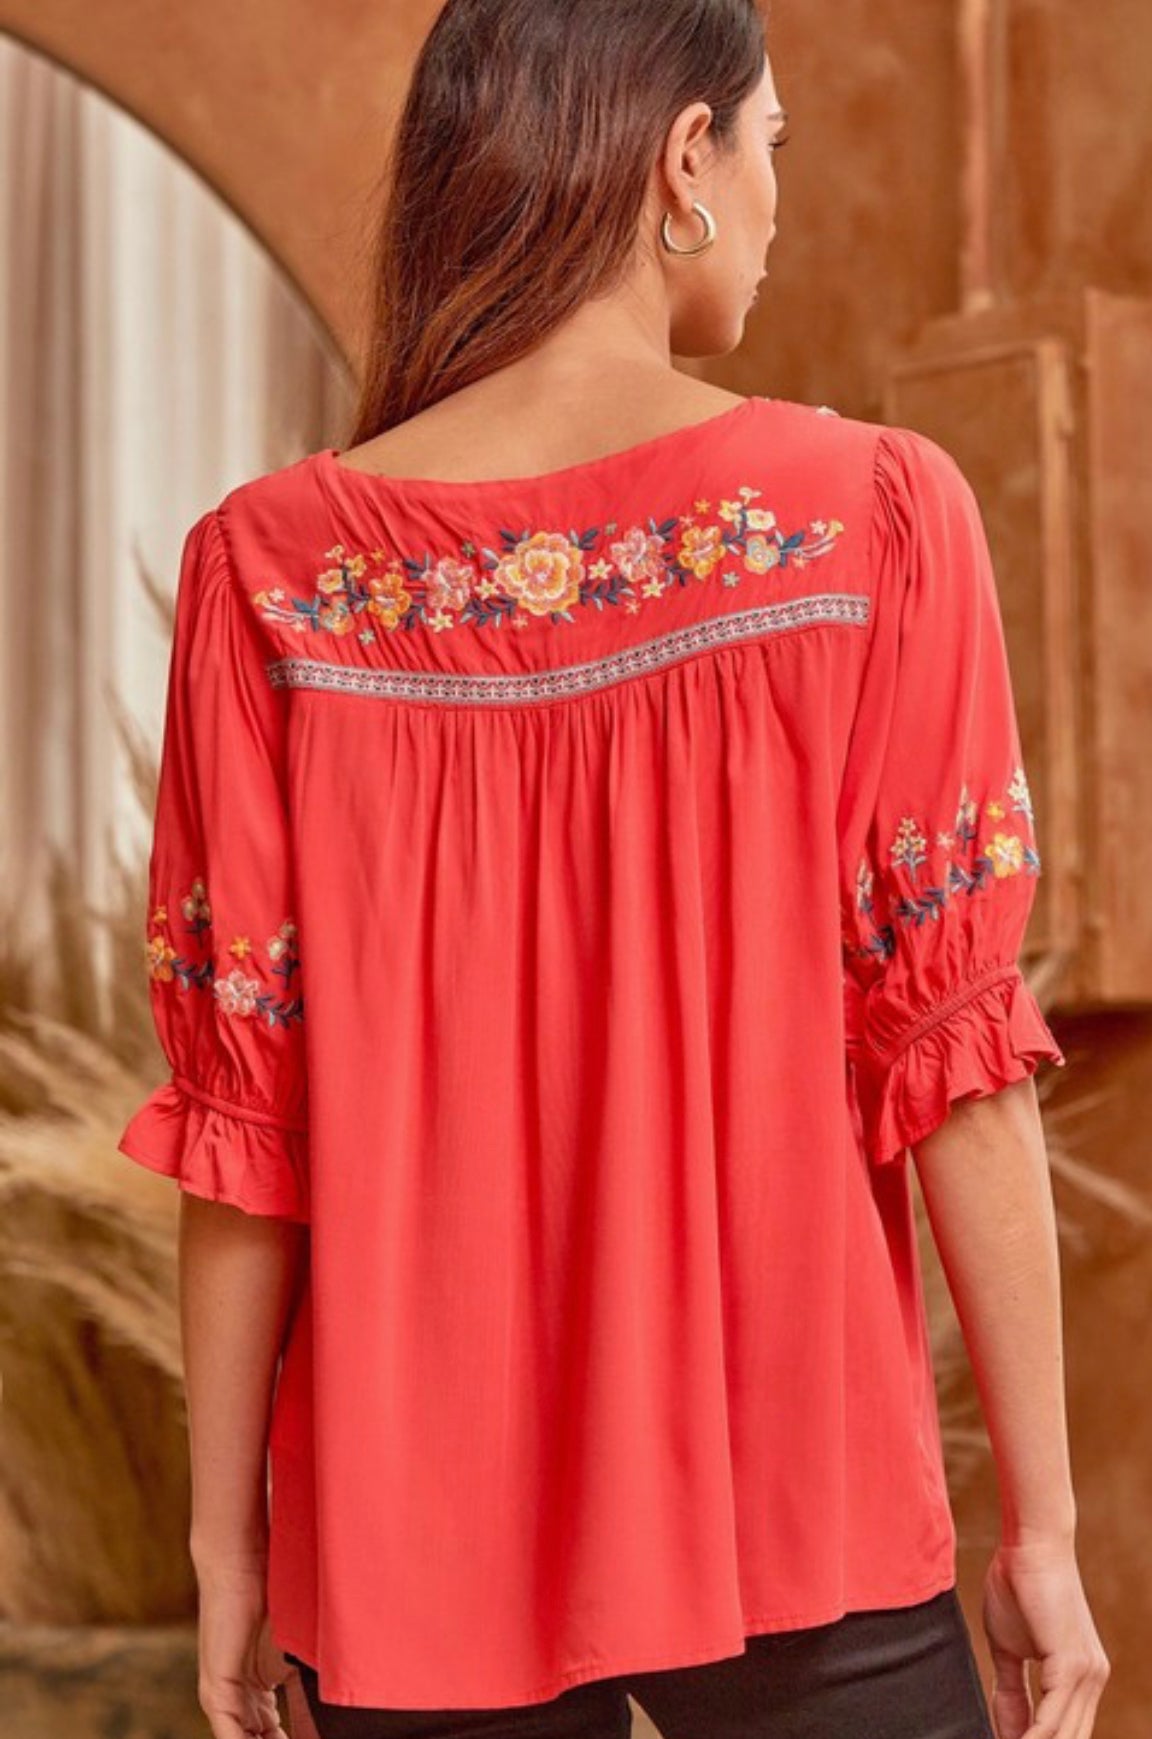 Wildflower Embroidery Top Tomato Red